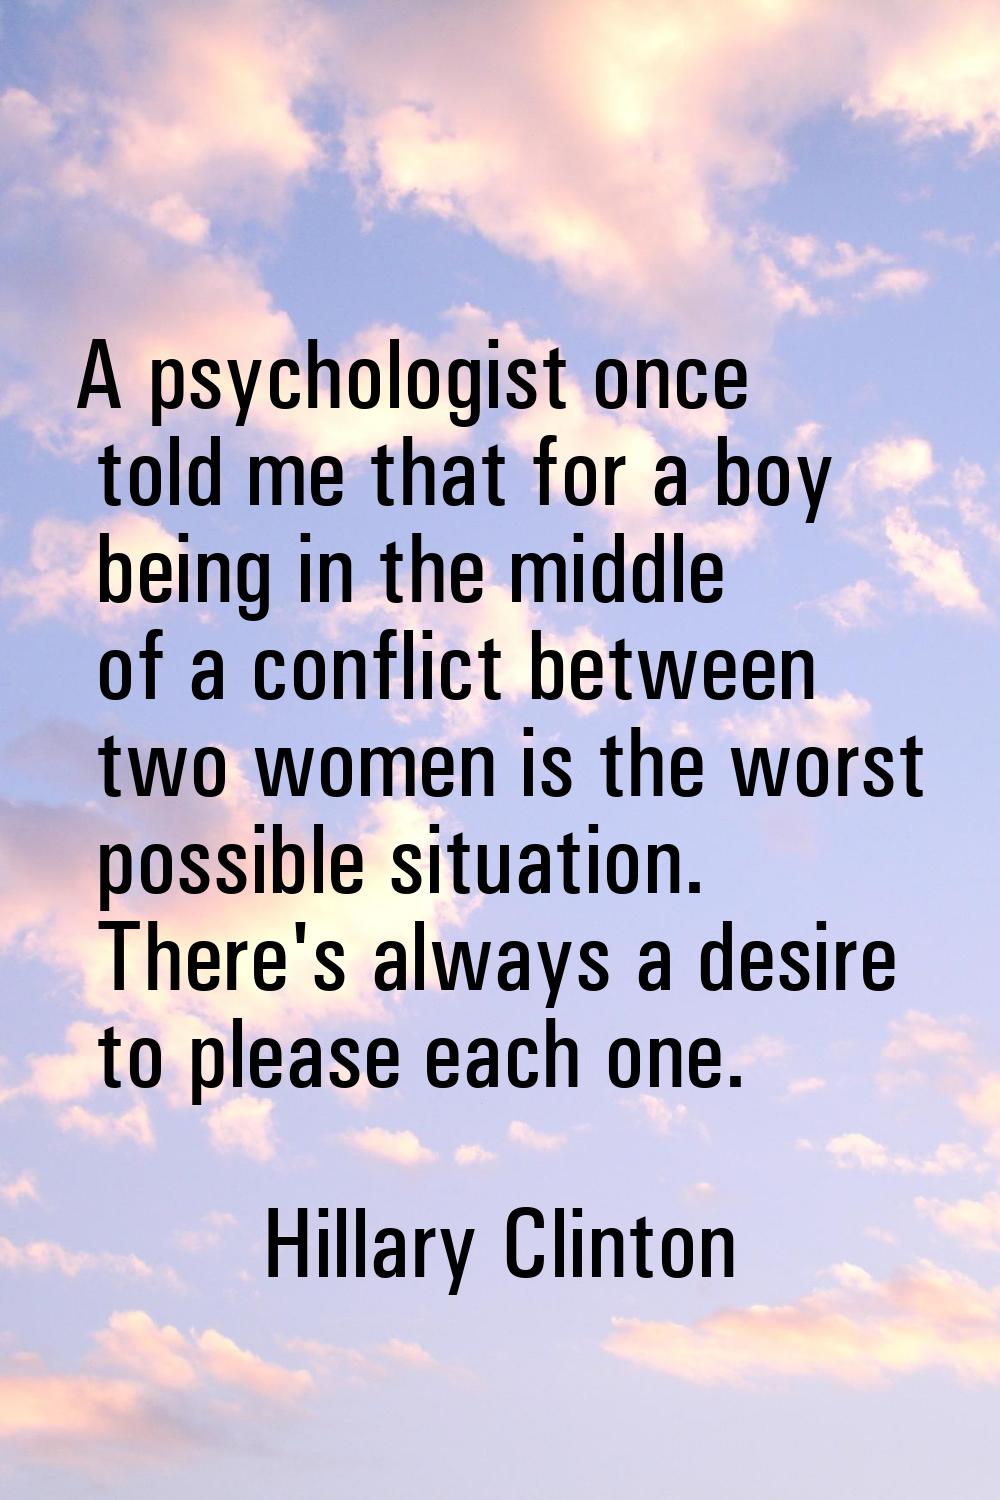 A psychologist once told me that for a boy being in the middle of a conflict between two women is t